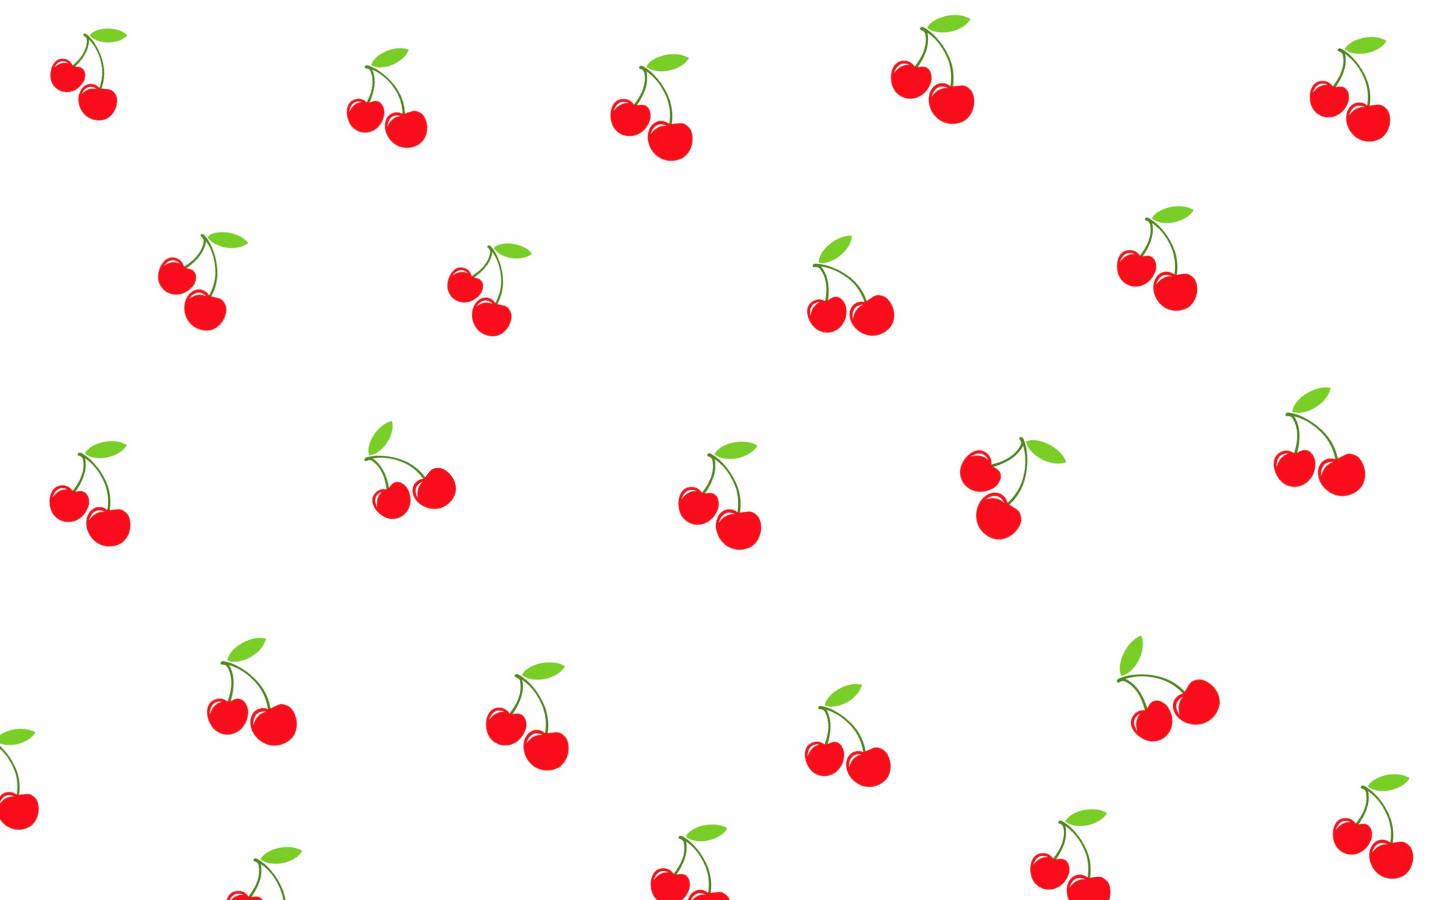 Enjoy the Sweetness of the Cute Cherry Aesthetic Wallpaper